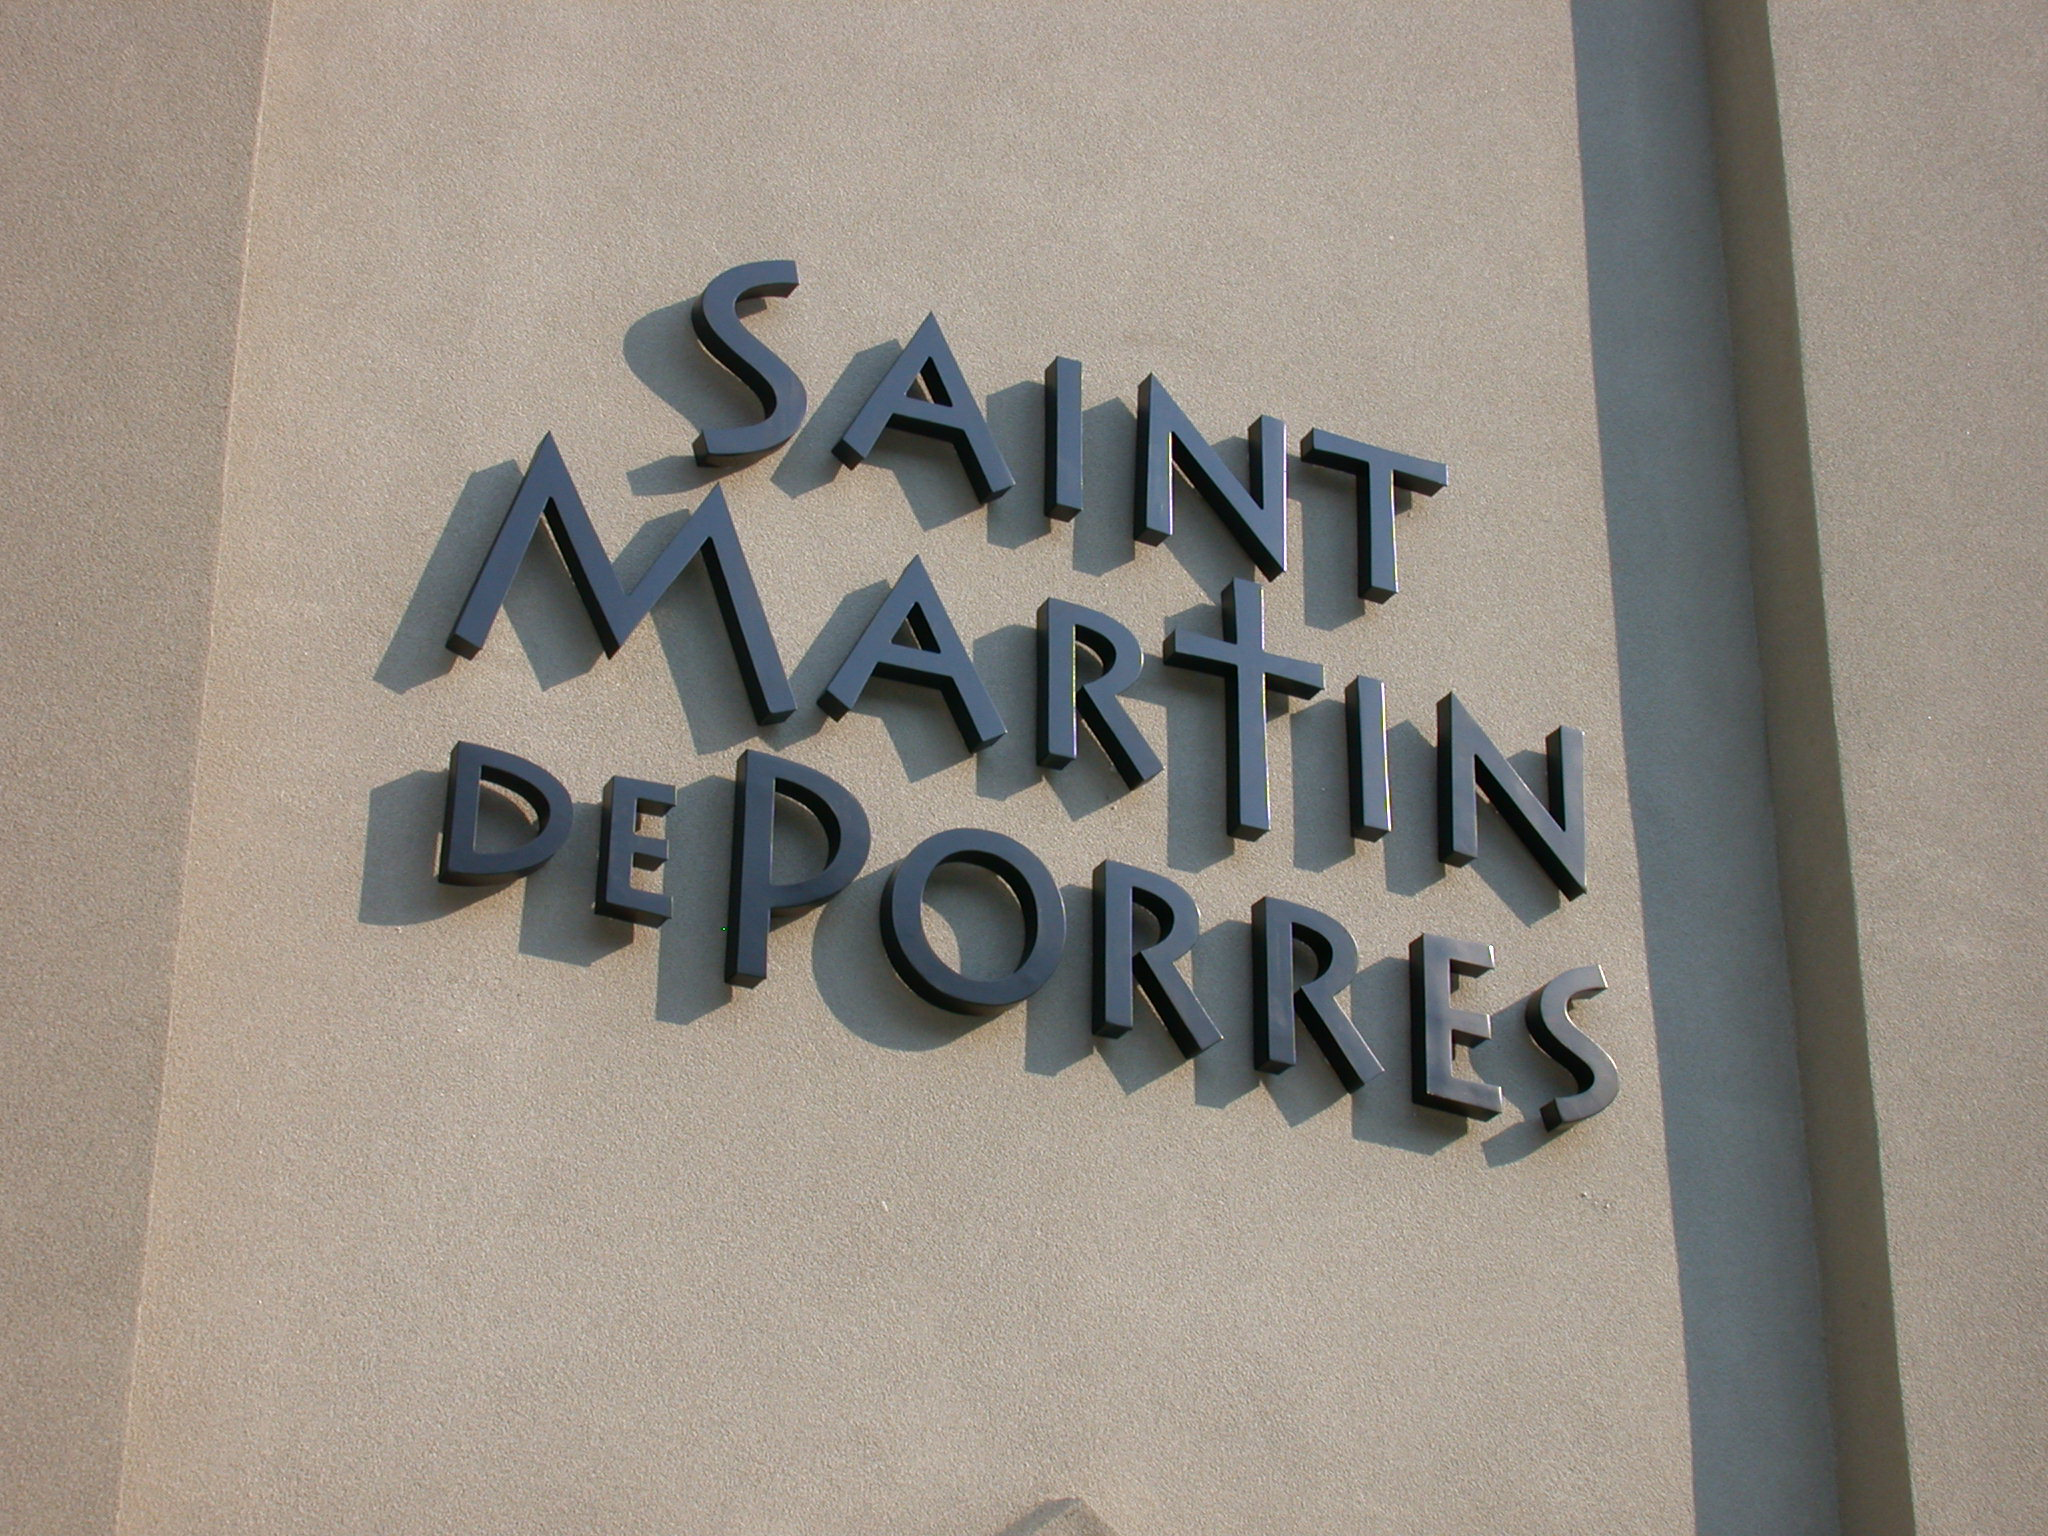  Branding creative, logo and signage design by Chuck Mitchell  Pro bono work developed for St. Martin de Porres National Shrine &amp; Institute, Memphis  Sign fabrication &amp; installation by Frank Balton Sign Company 